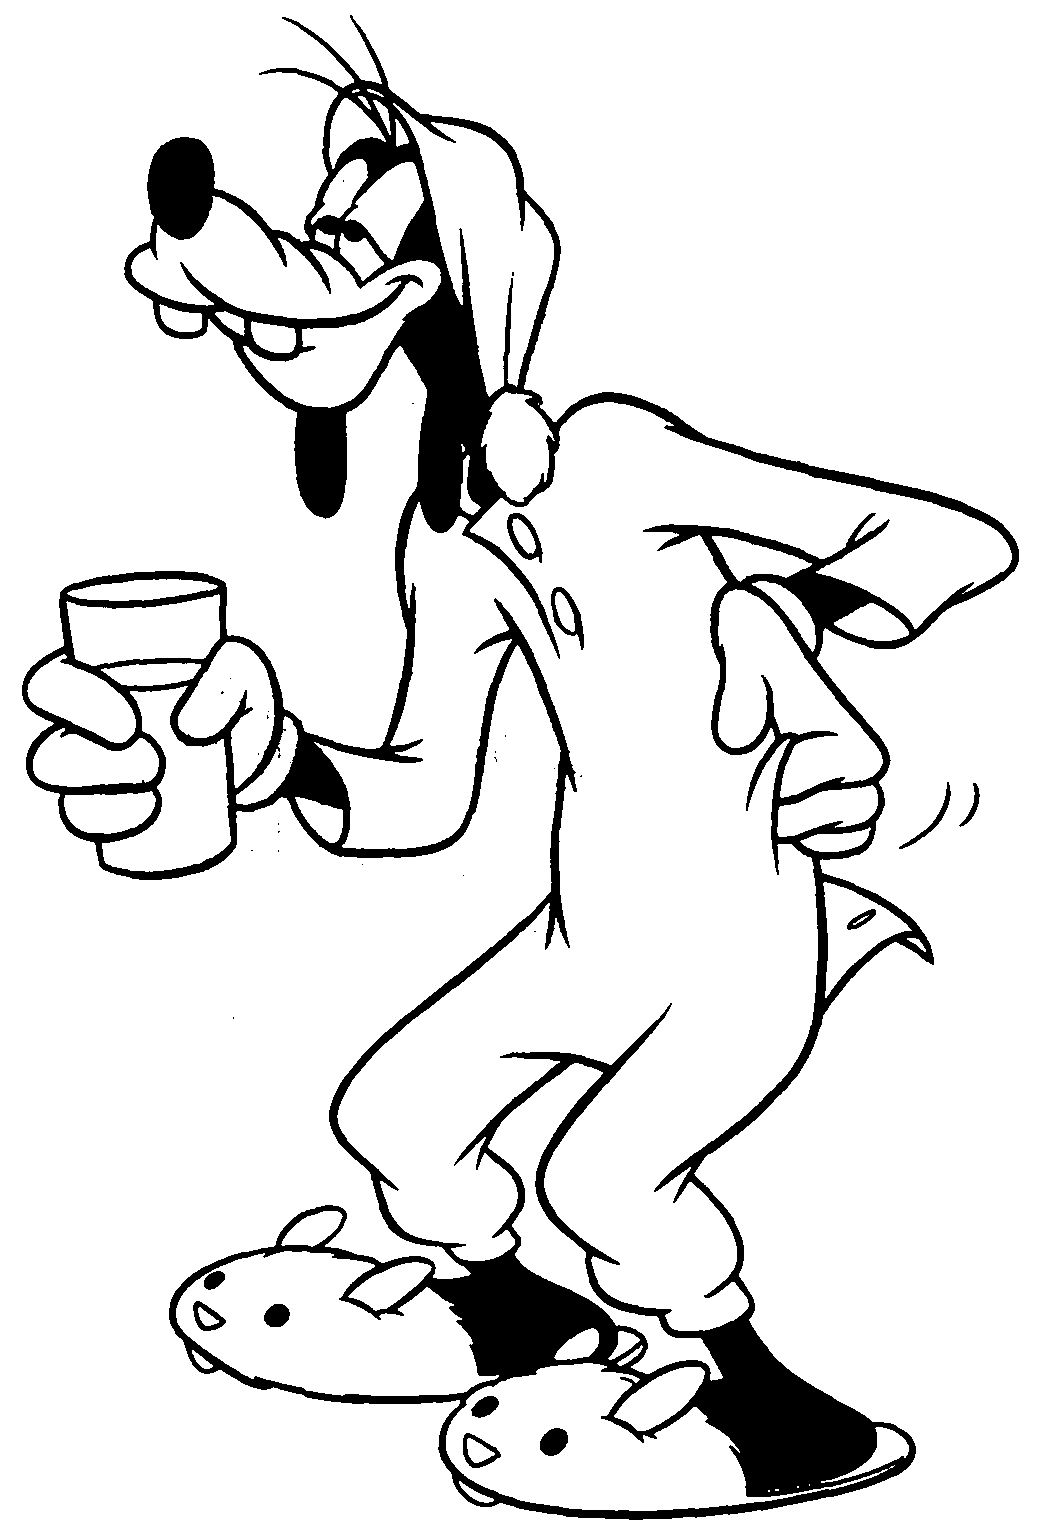 Goofy Coloring Pages For Kids Visual Arts Ideas